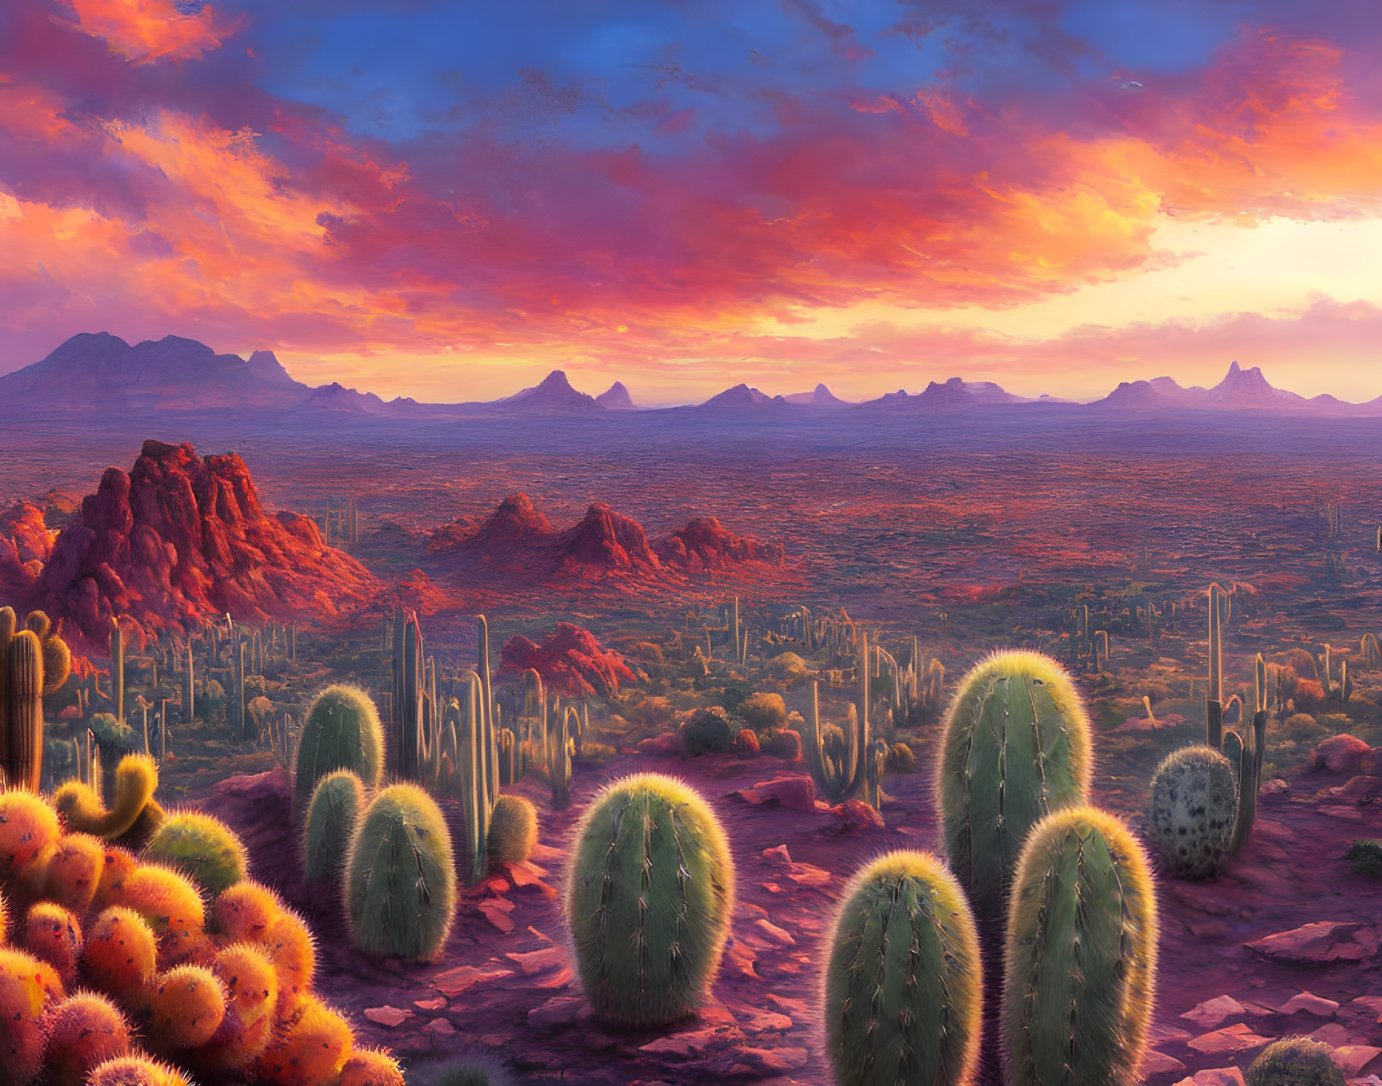 Colorful Sunset Desert Landscape with Cacti and Red Rocks